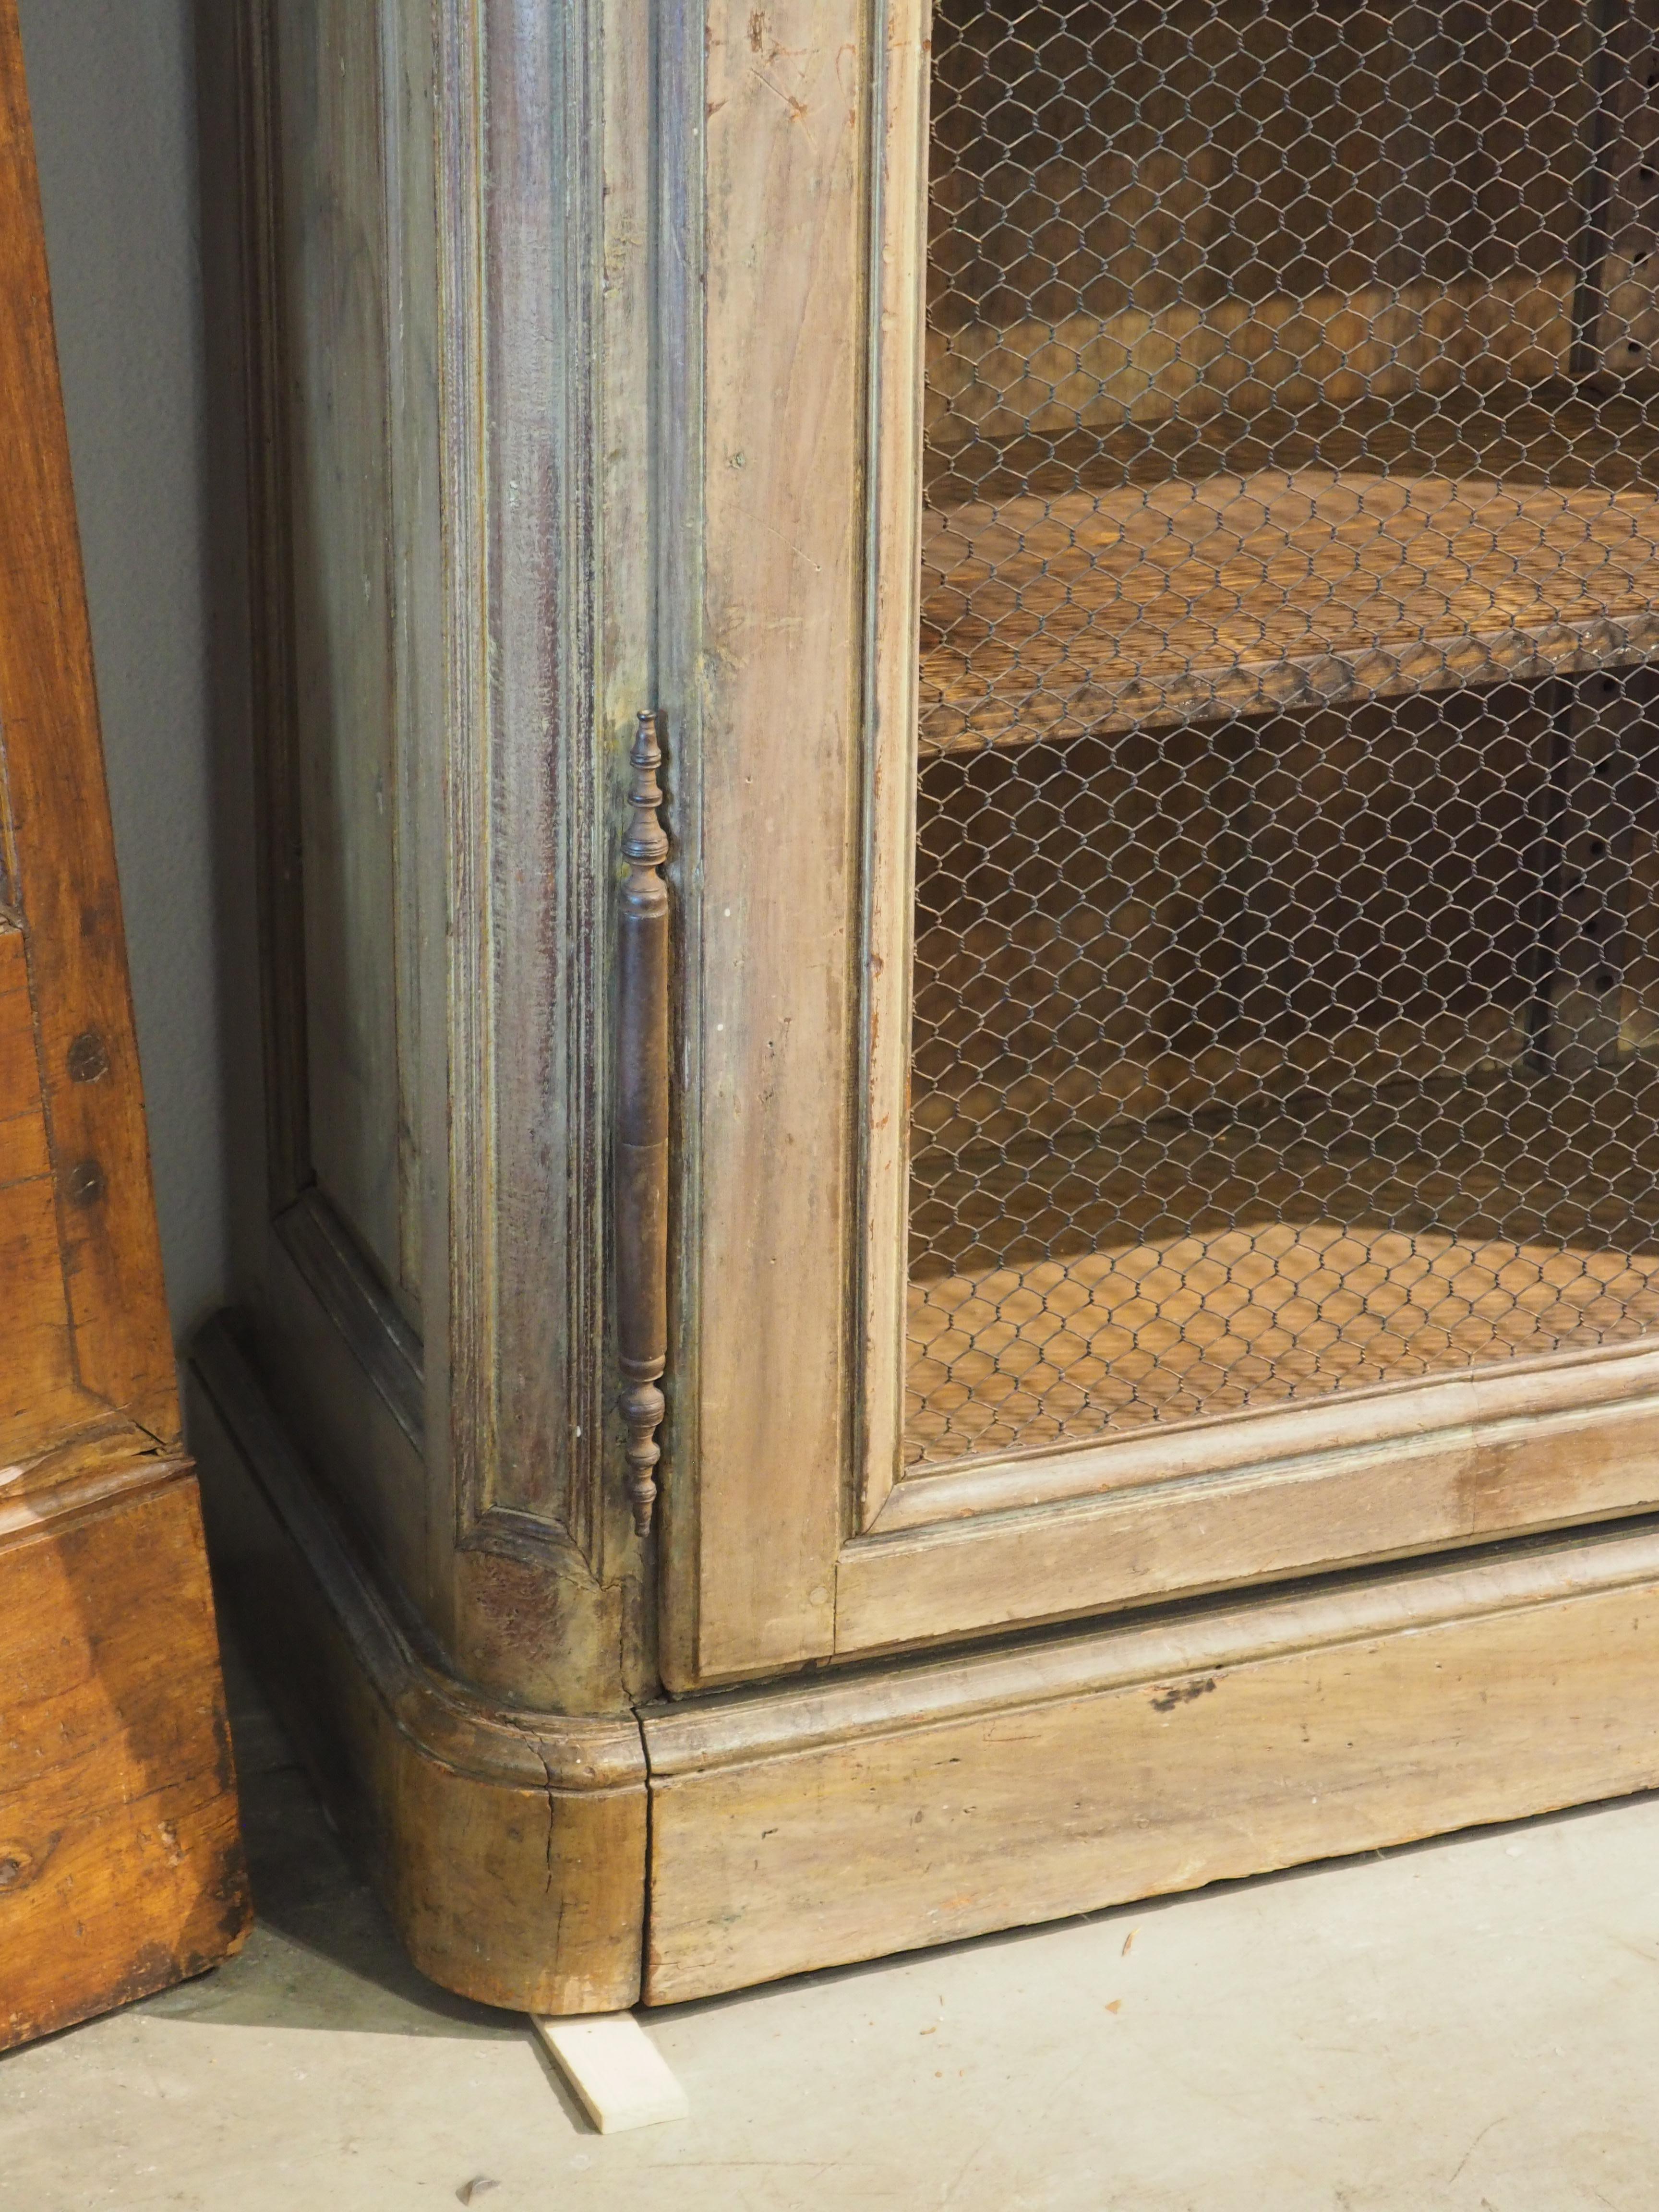 Early 19th Century French Bibliotheque Cabinet with Wire Mesh Door Panels 4